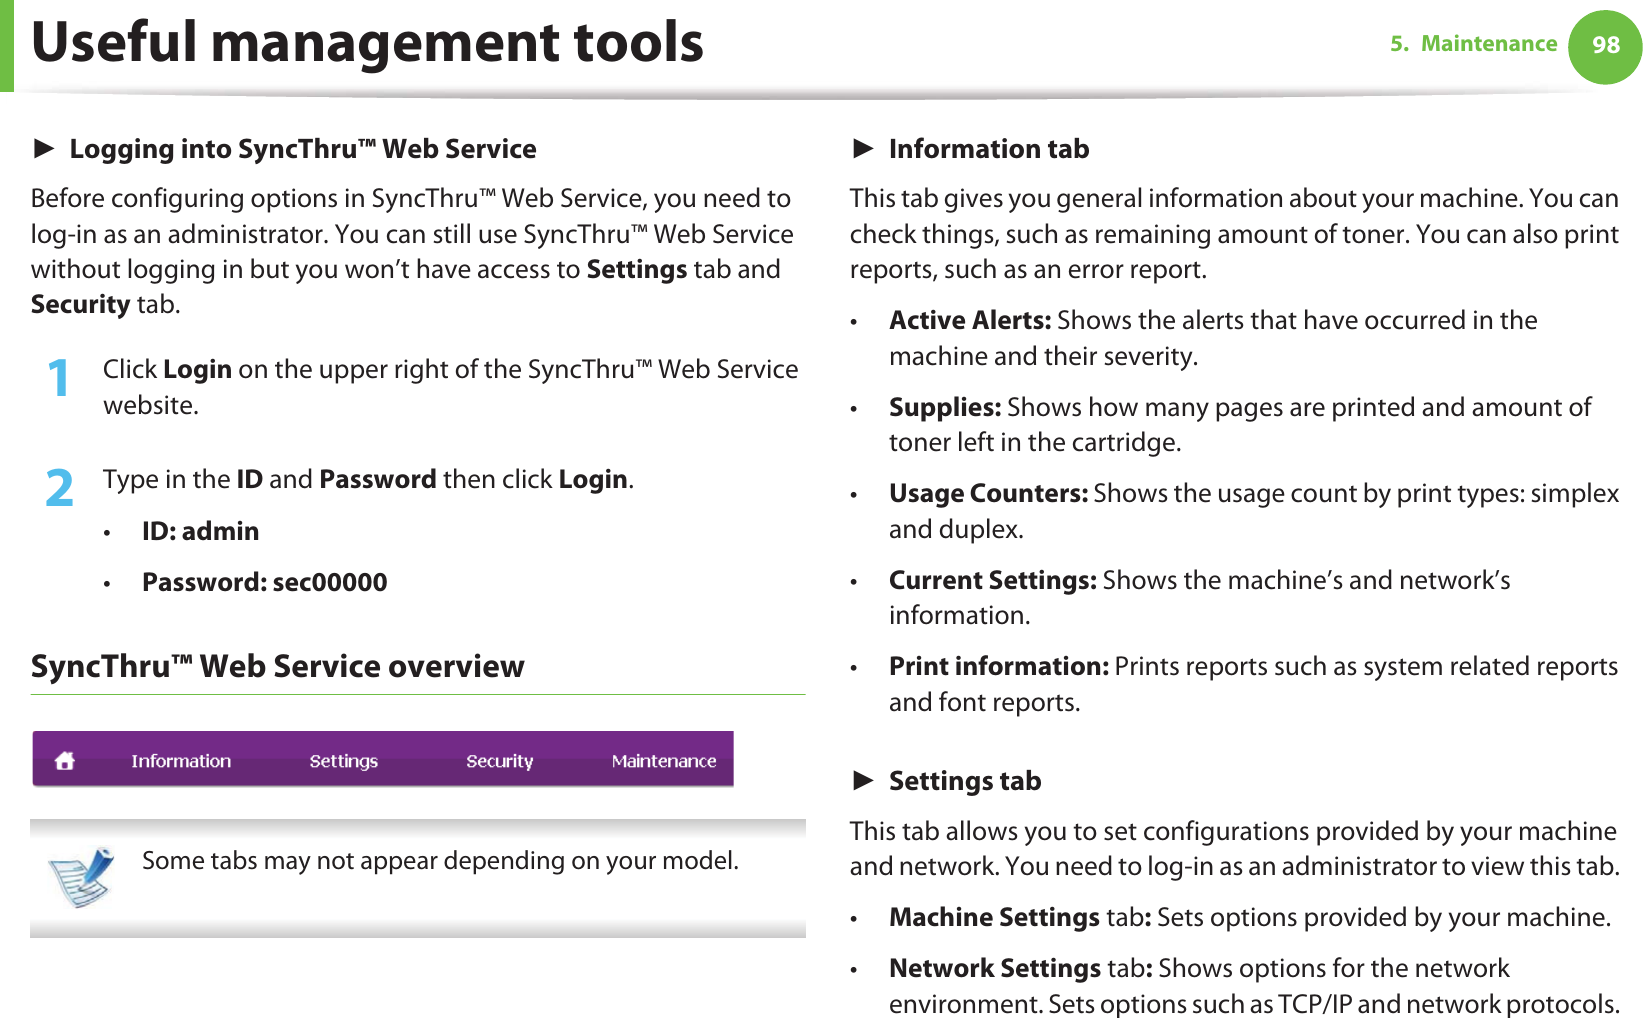 Useful management tools 985. MaintenanceŹLogging into SyncThru™ Web ServiceBefore configuring options in SyncThru™ Web Service, you need to log-in as an administrator. You can still use SyncThru™ Web Service without logging in but you won’t have access to Settings tab and Security tab. 1Click Login on the upper right of the SyncThru™ Web Service website.2  Type in the ID and Password then click Login.•ID: admin •Password: sec00000SyncThru™ Web Service overview Some tabs may not appear depending on your model. ŹInformation tabThis tab gives you general information about your machine. You can check things, such as remaining amount of toner. You can also print reports, such as an error report.•Active Alerts: Shows the alerts that have occurred in the machine and their severity.•Supplies: Shows how many pages are printed and amount of toner left in the cartridge.•Usage Counters: Shows the usage count by print types: simplex and duplex.•Current Settings: Shows the machine’s and network’s information. •Print information: Prints reports such as system related reports and font reports.ŹSettings tabThis tab allows you to set configurations provided by your machine and network. You need to log-in as an administrator to view this tab. •Machine Settings tab: Sets options provided by your machine. •Network Settings tab: Shows options for the network environment. Sets options such as TCP/IP and network protocols. 